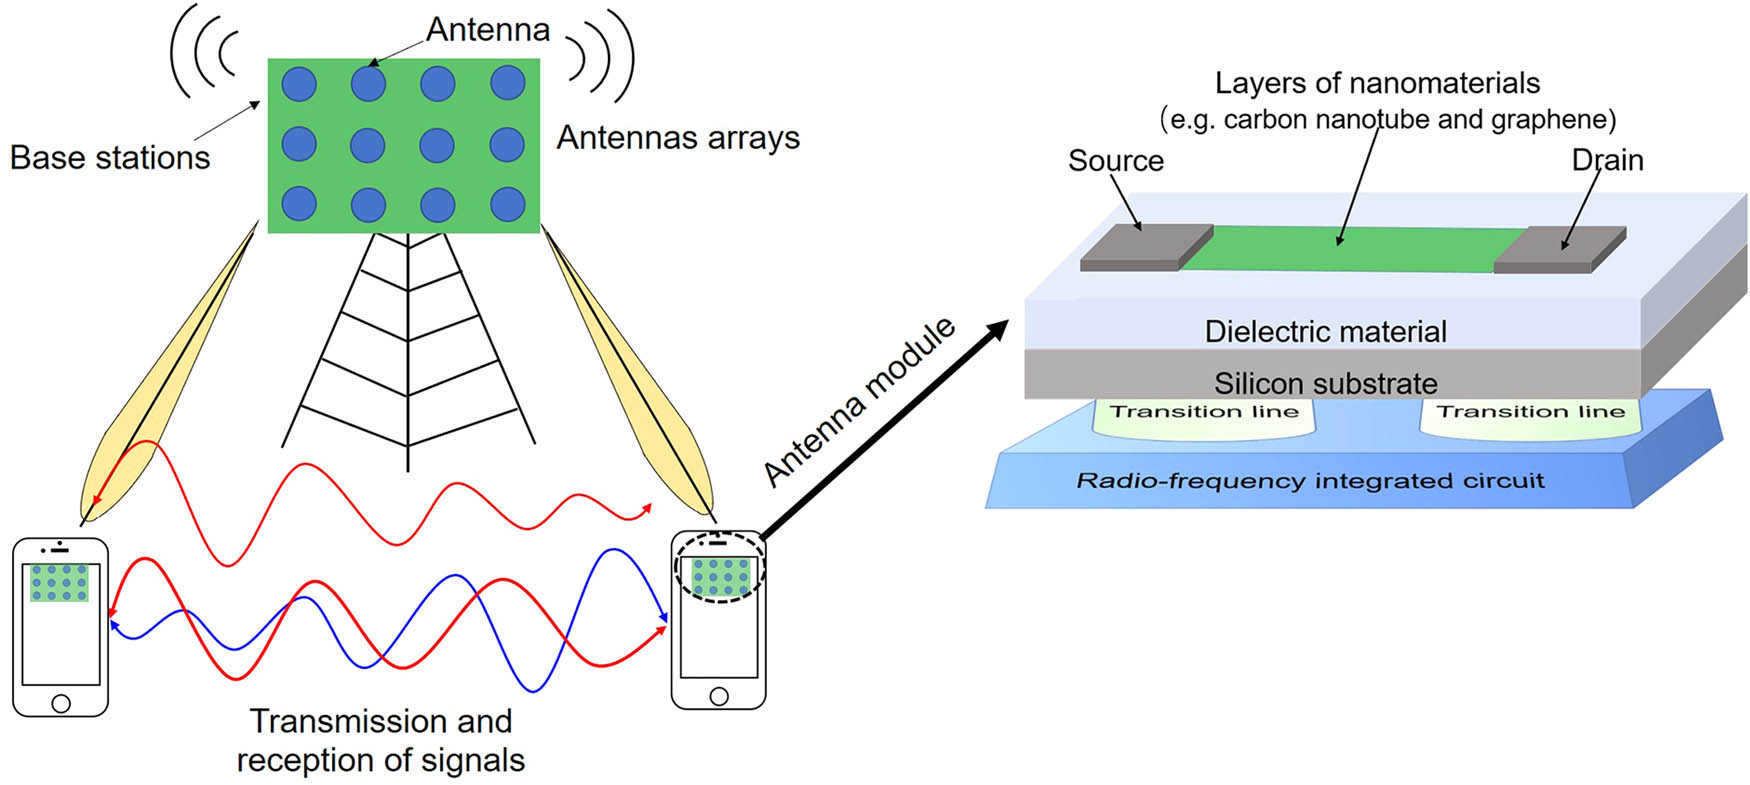 The use of nanomaterials in the technological development for the 5G wireless communications